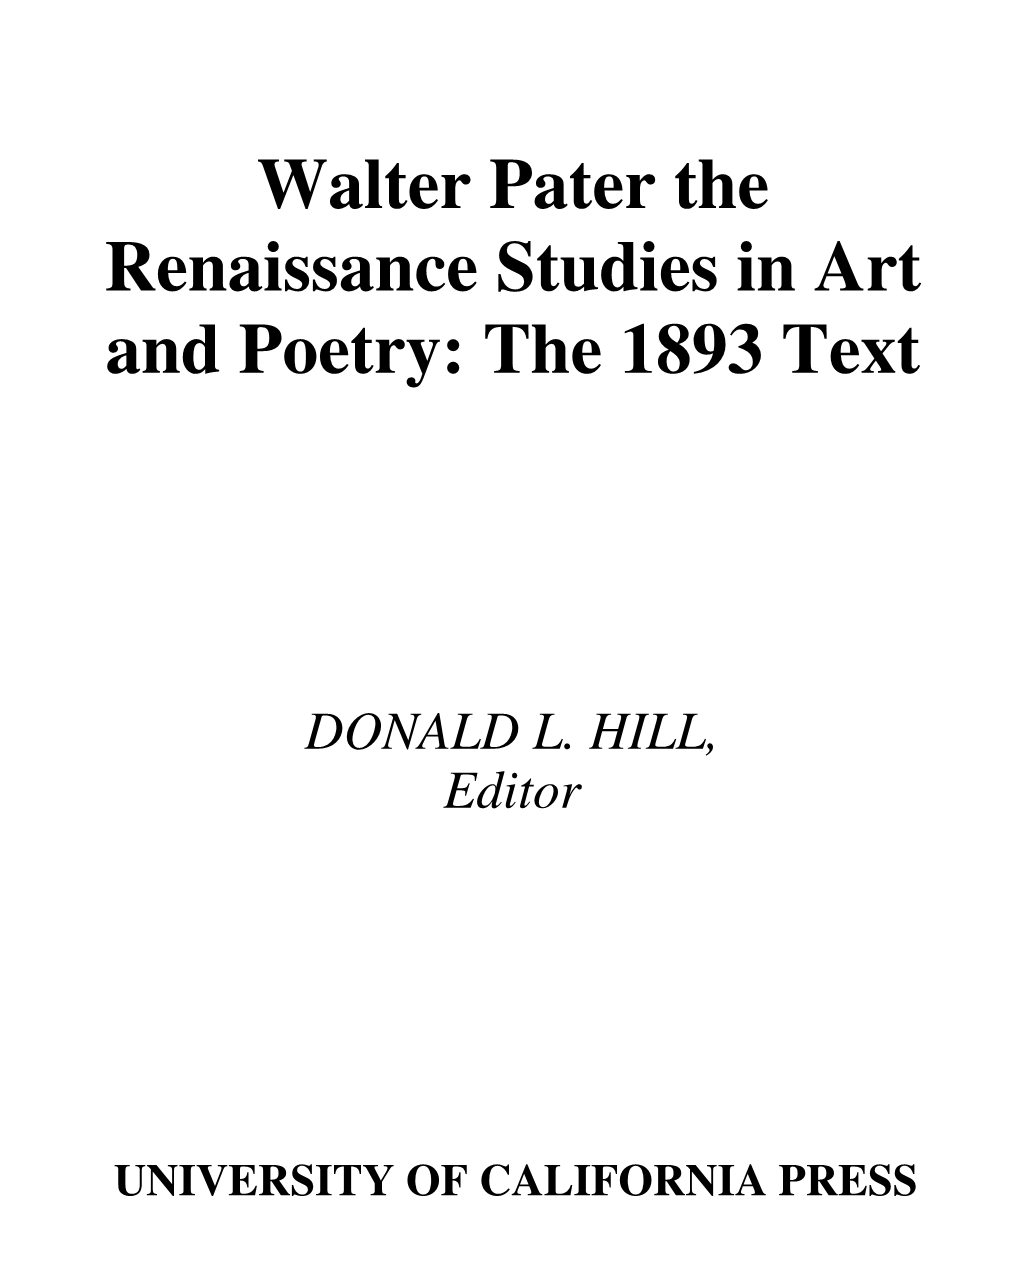 Walter Pater the Renaissance Studies in Art and Poetry: the 1893 Text